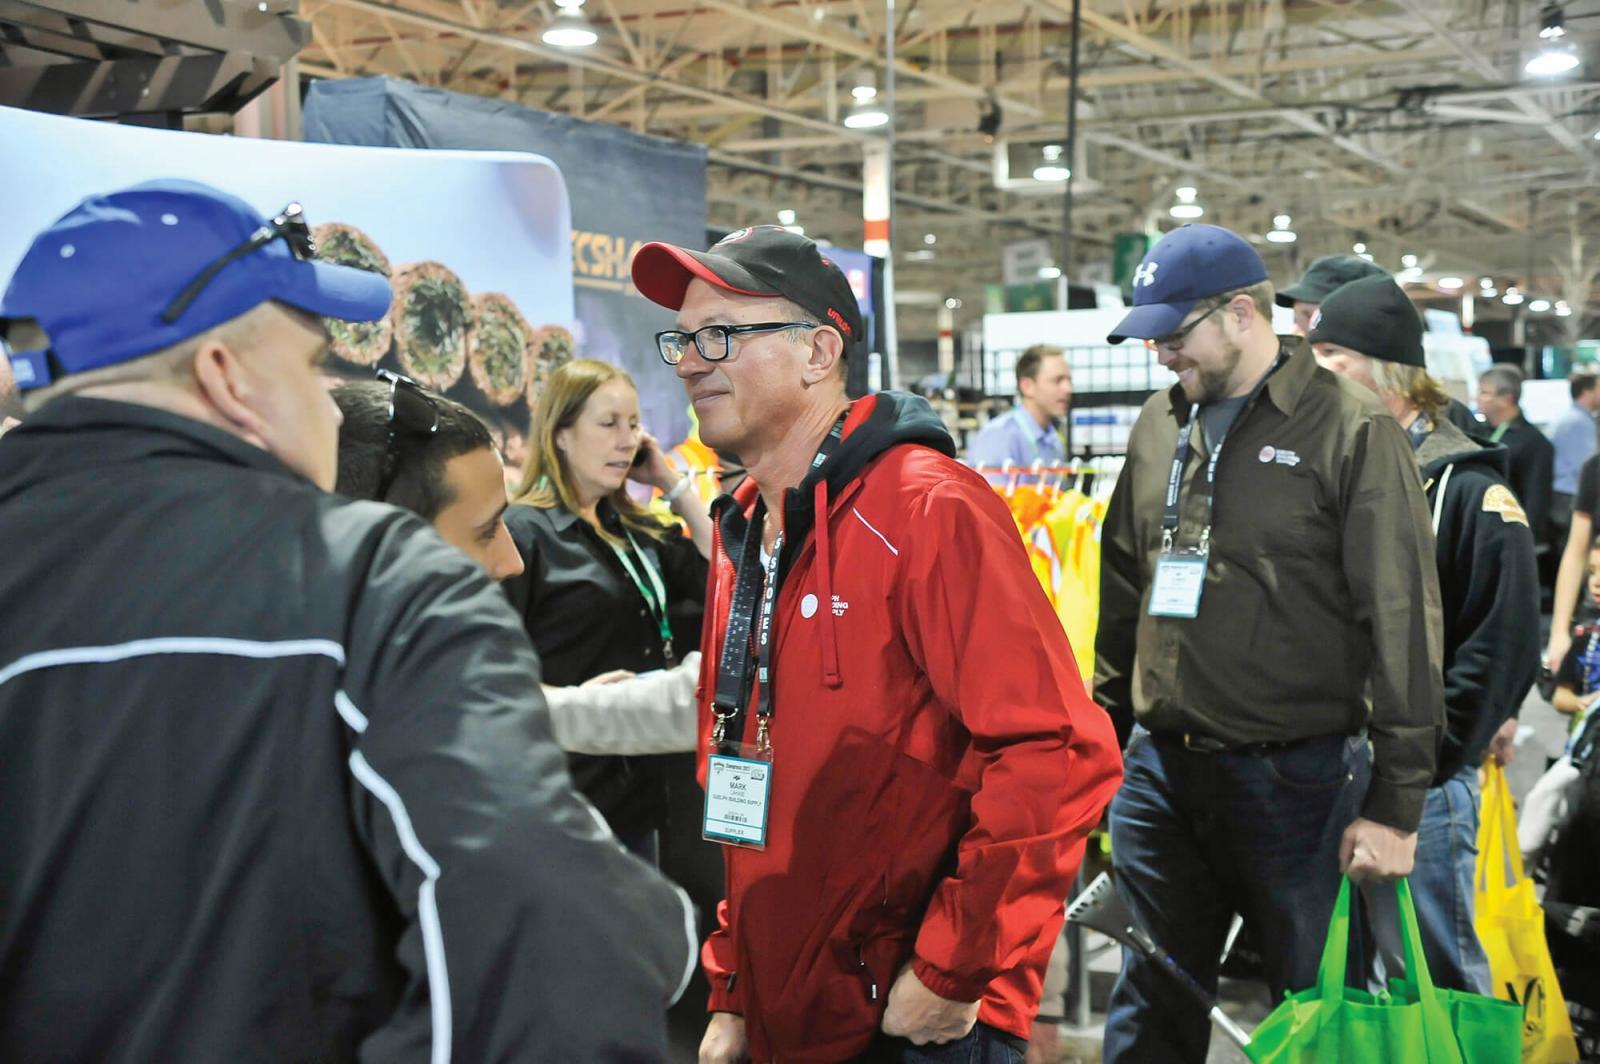 Congress ’17 saw an increase in attendees  for the over 600 exhibitors.